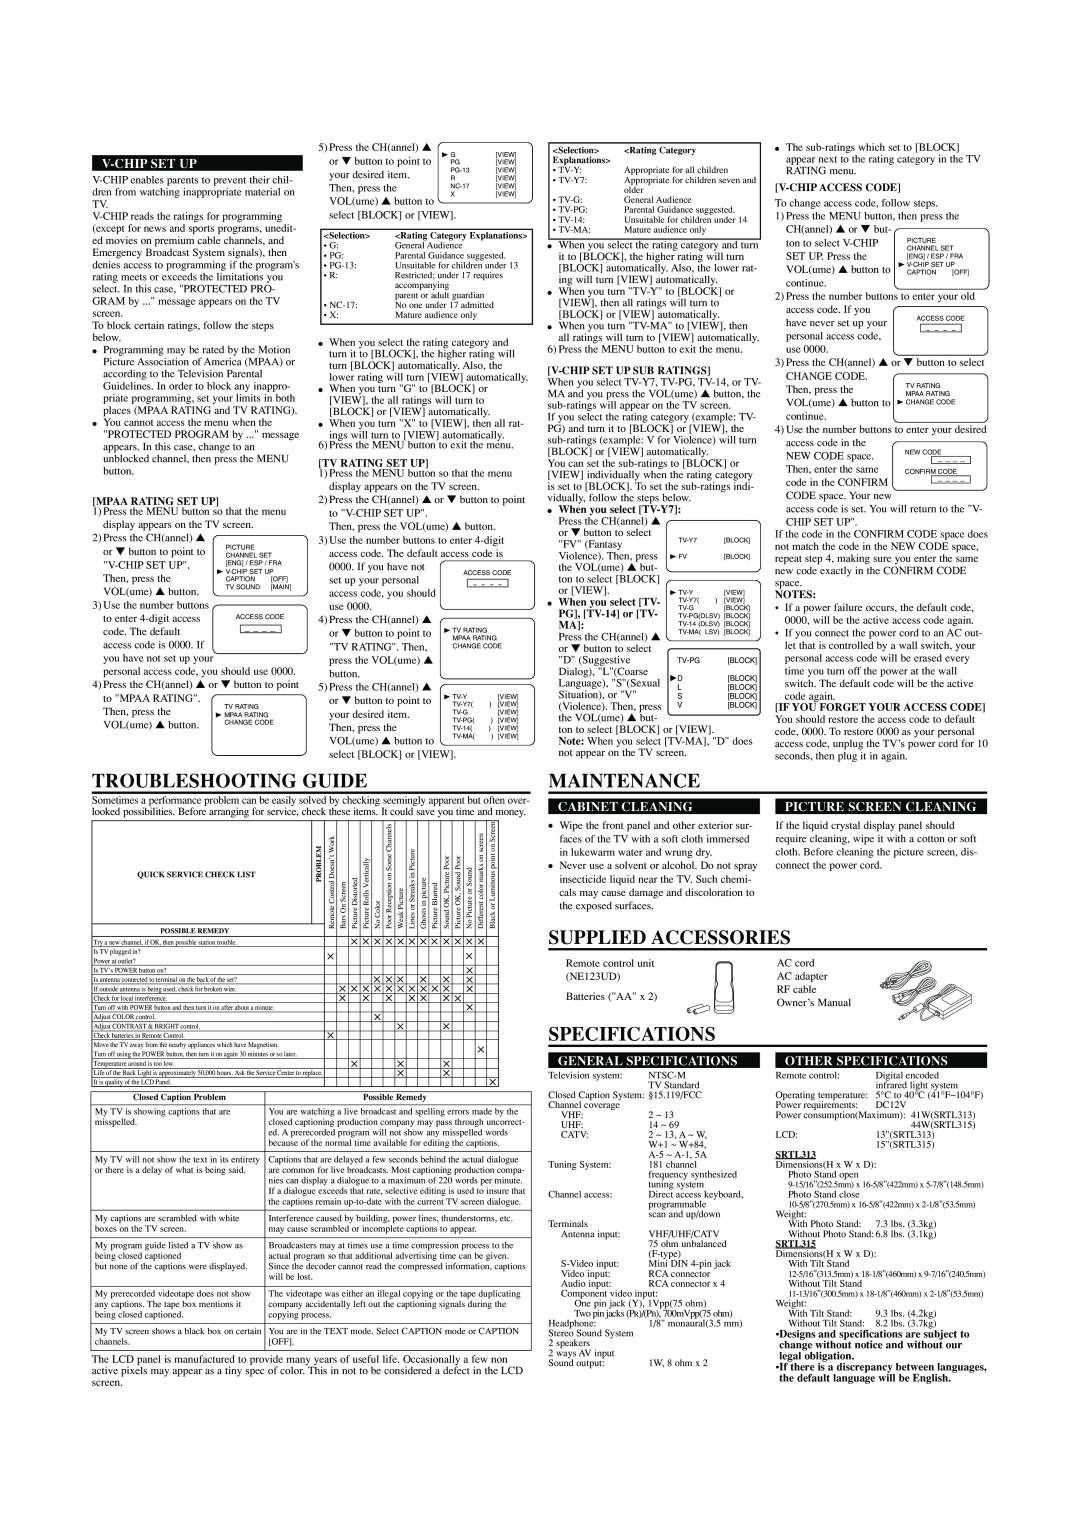 Sears SRTL313, SRTL315 owner manual Troubleshooting Guide, Maintenance, Supplied Accessories, Specifications, V-Chip Set Up 